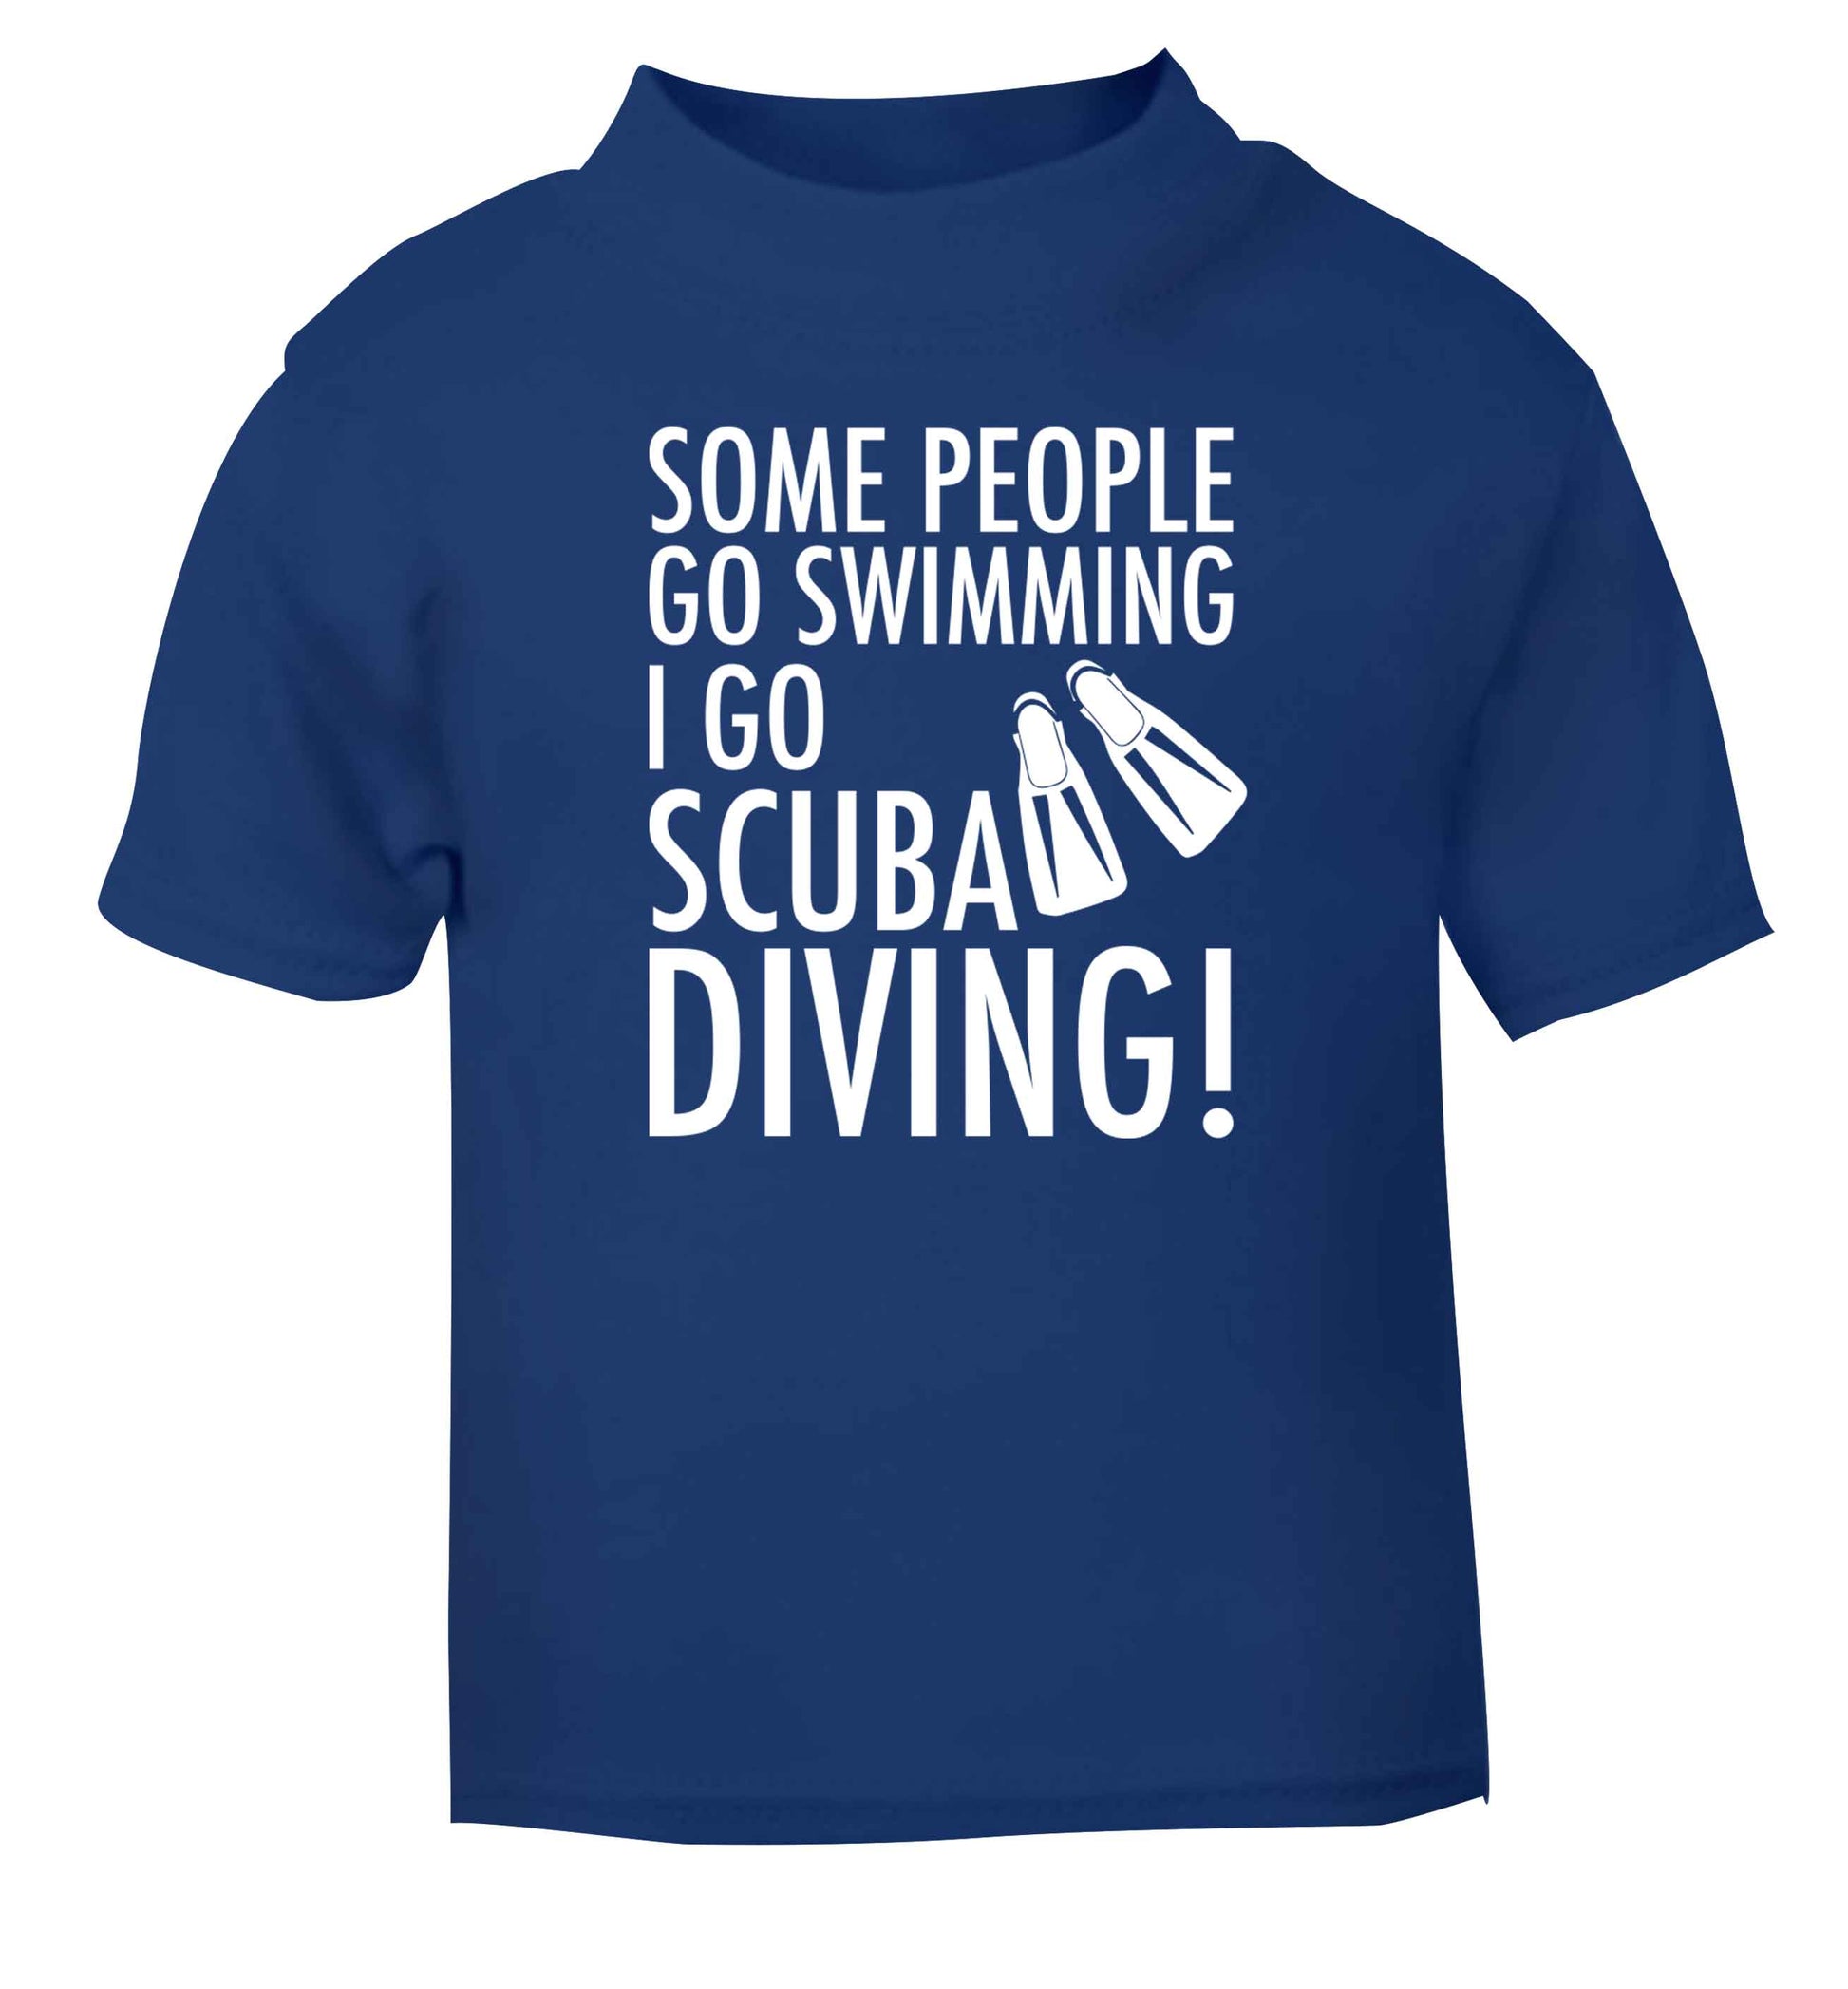 Some people go swimming I go scuba diving! blue Baby Toddler Tshirt 2 Years